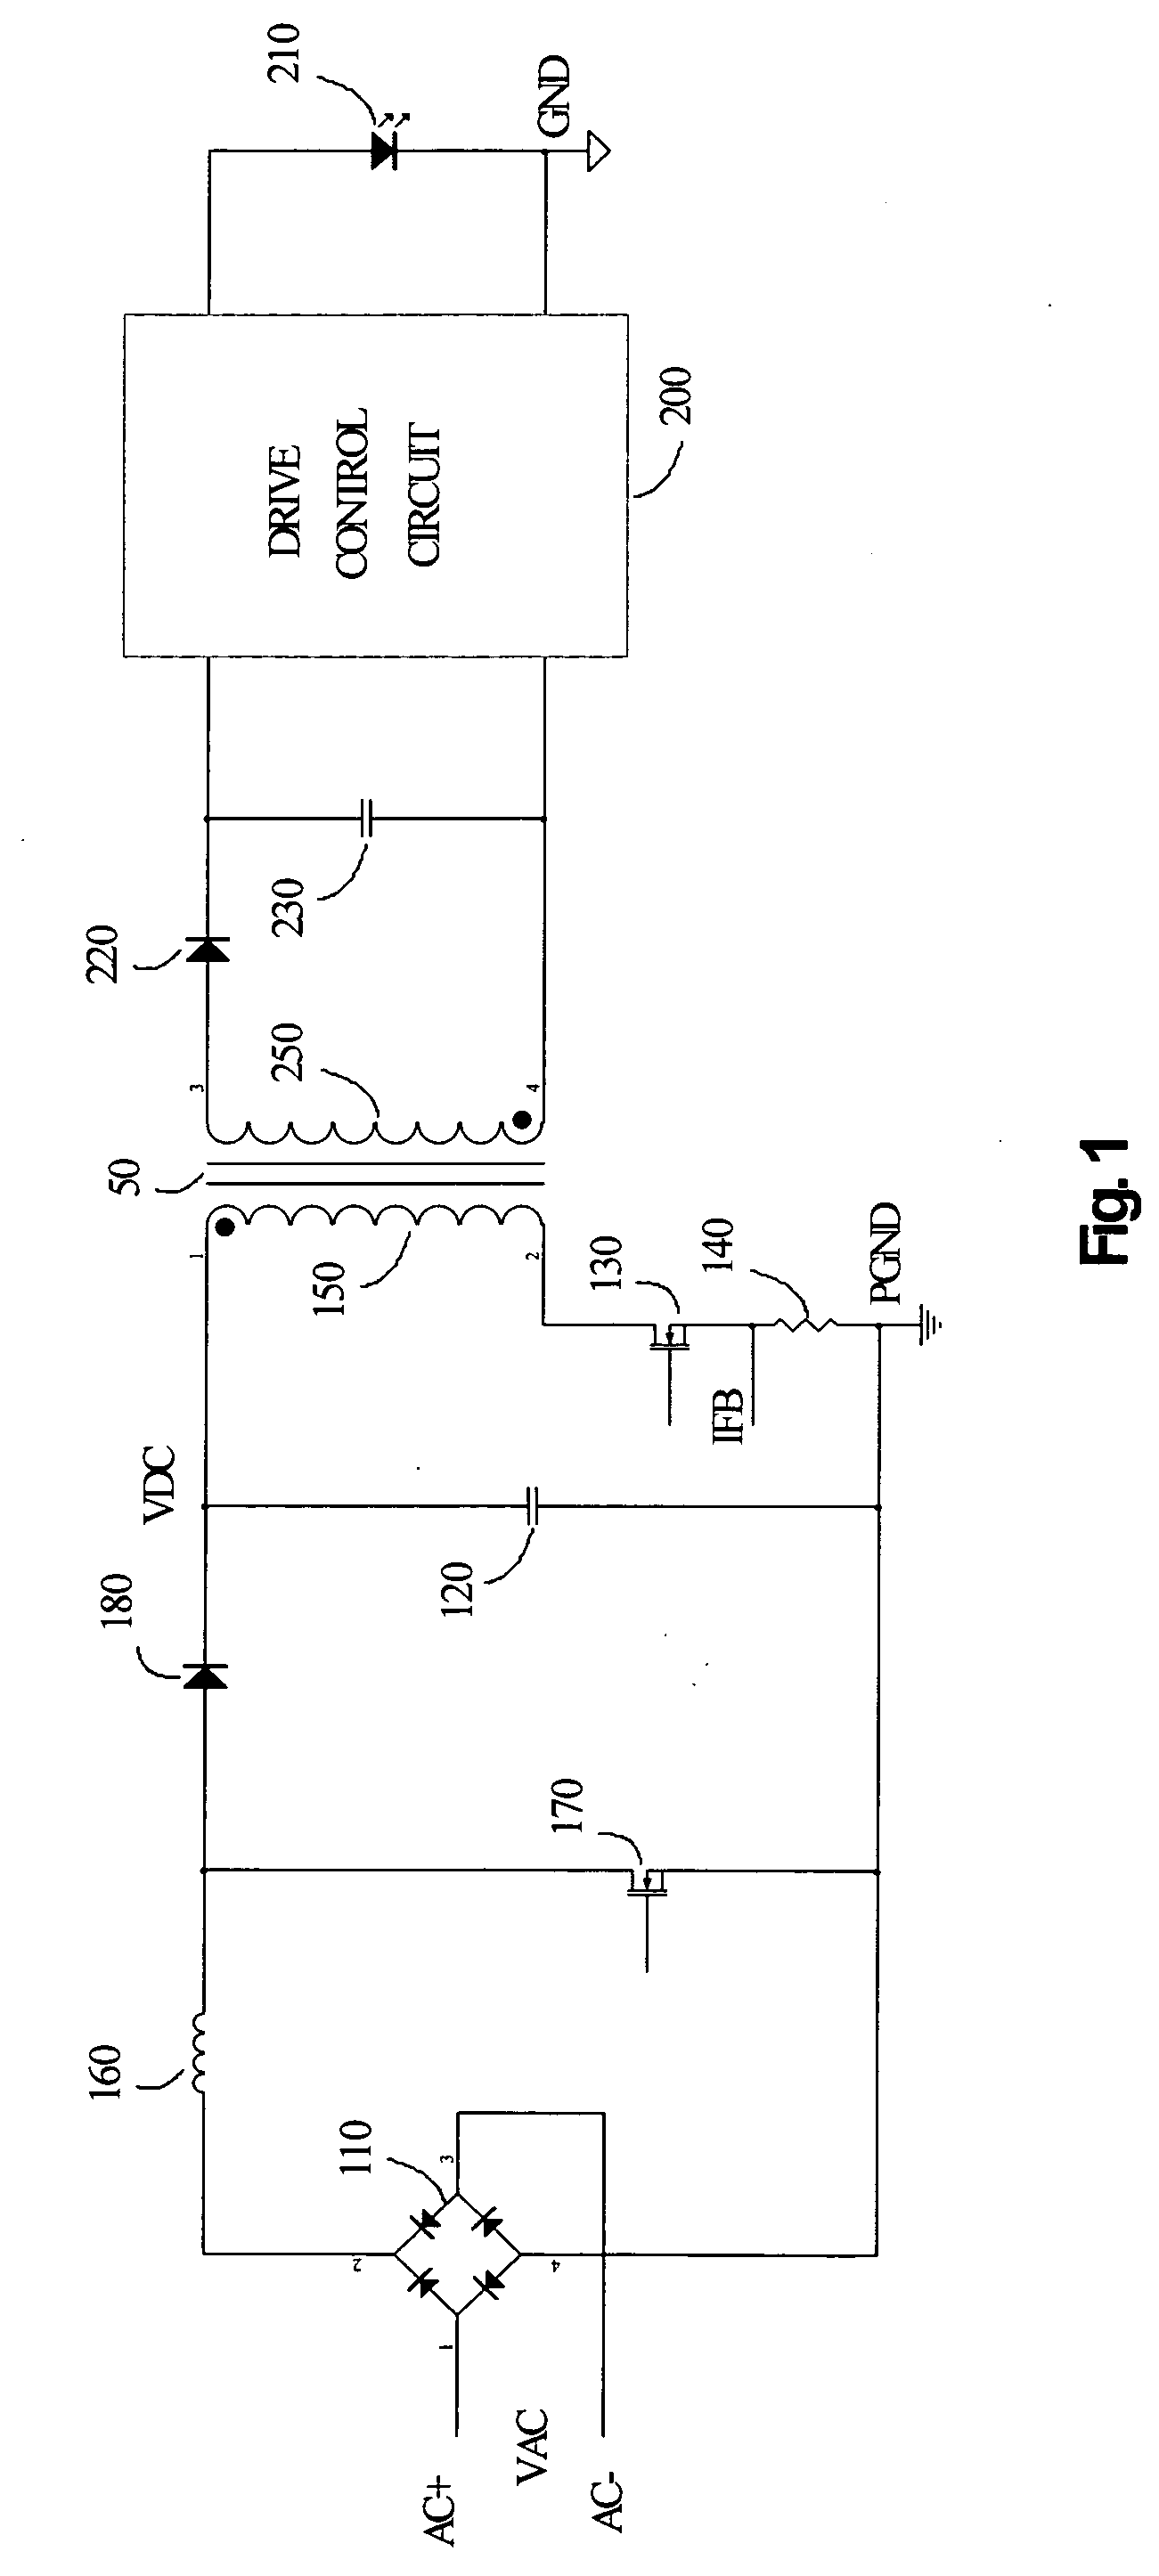 Method and appratus of driving LED and OLED devices